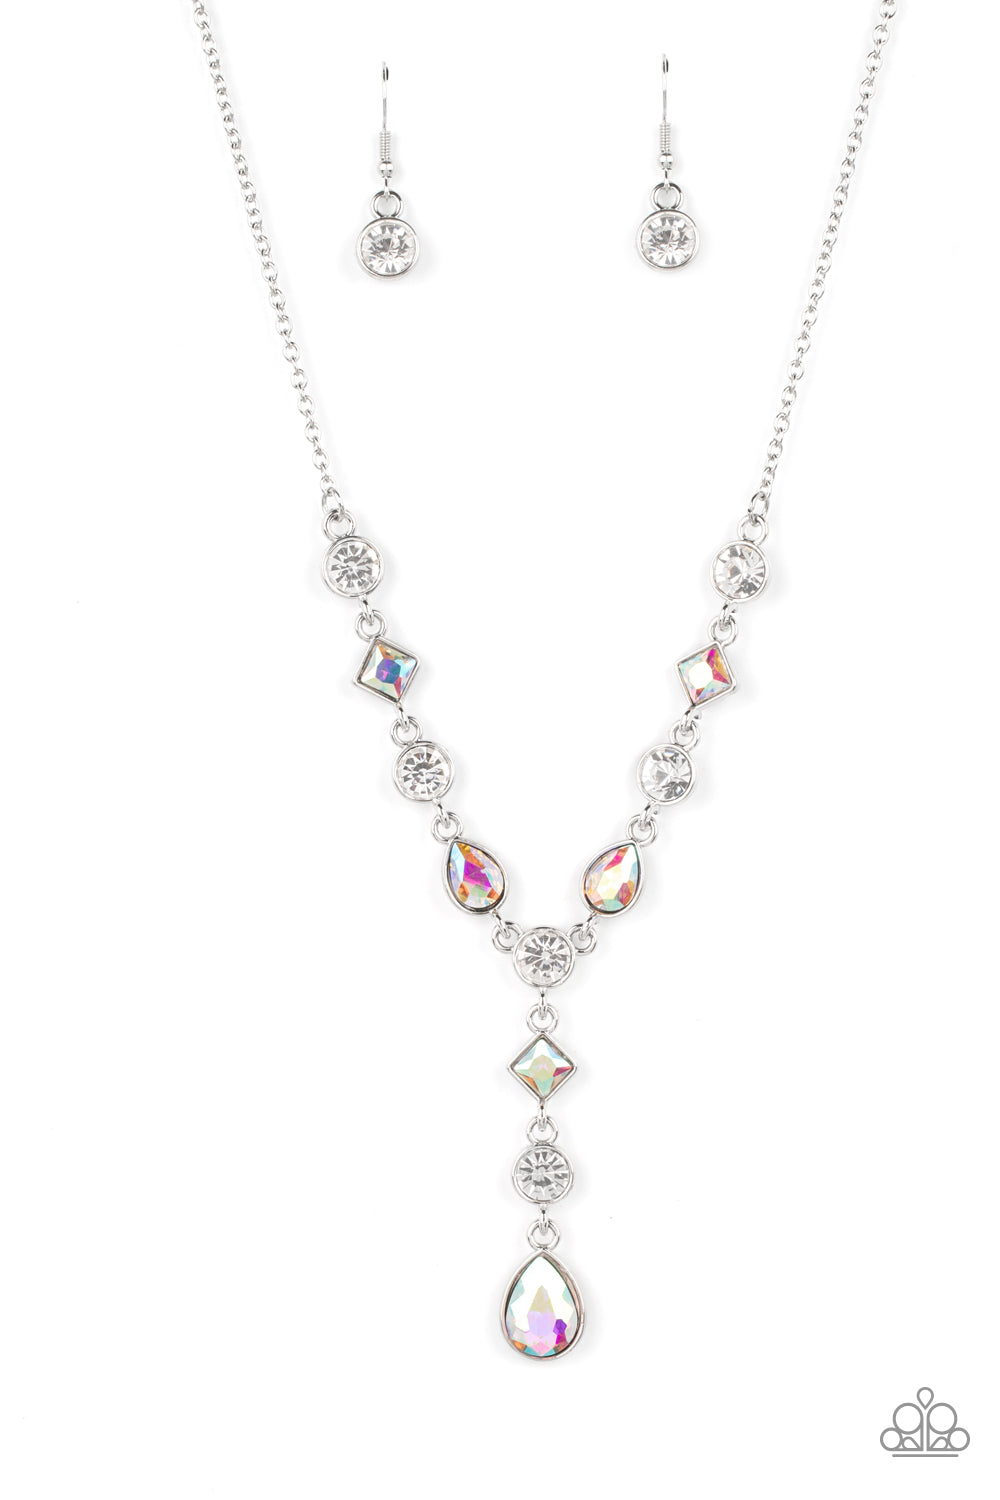 Forget the Crown - multi - Paparazzi necklace